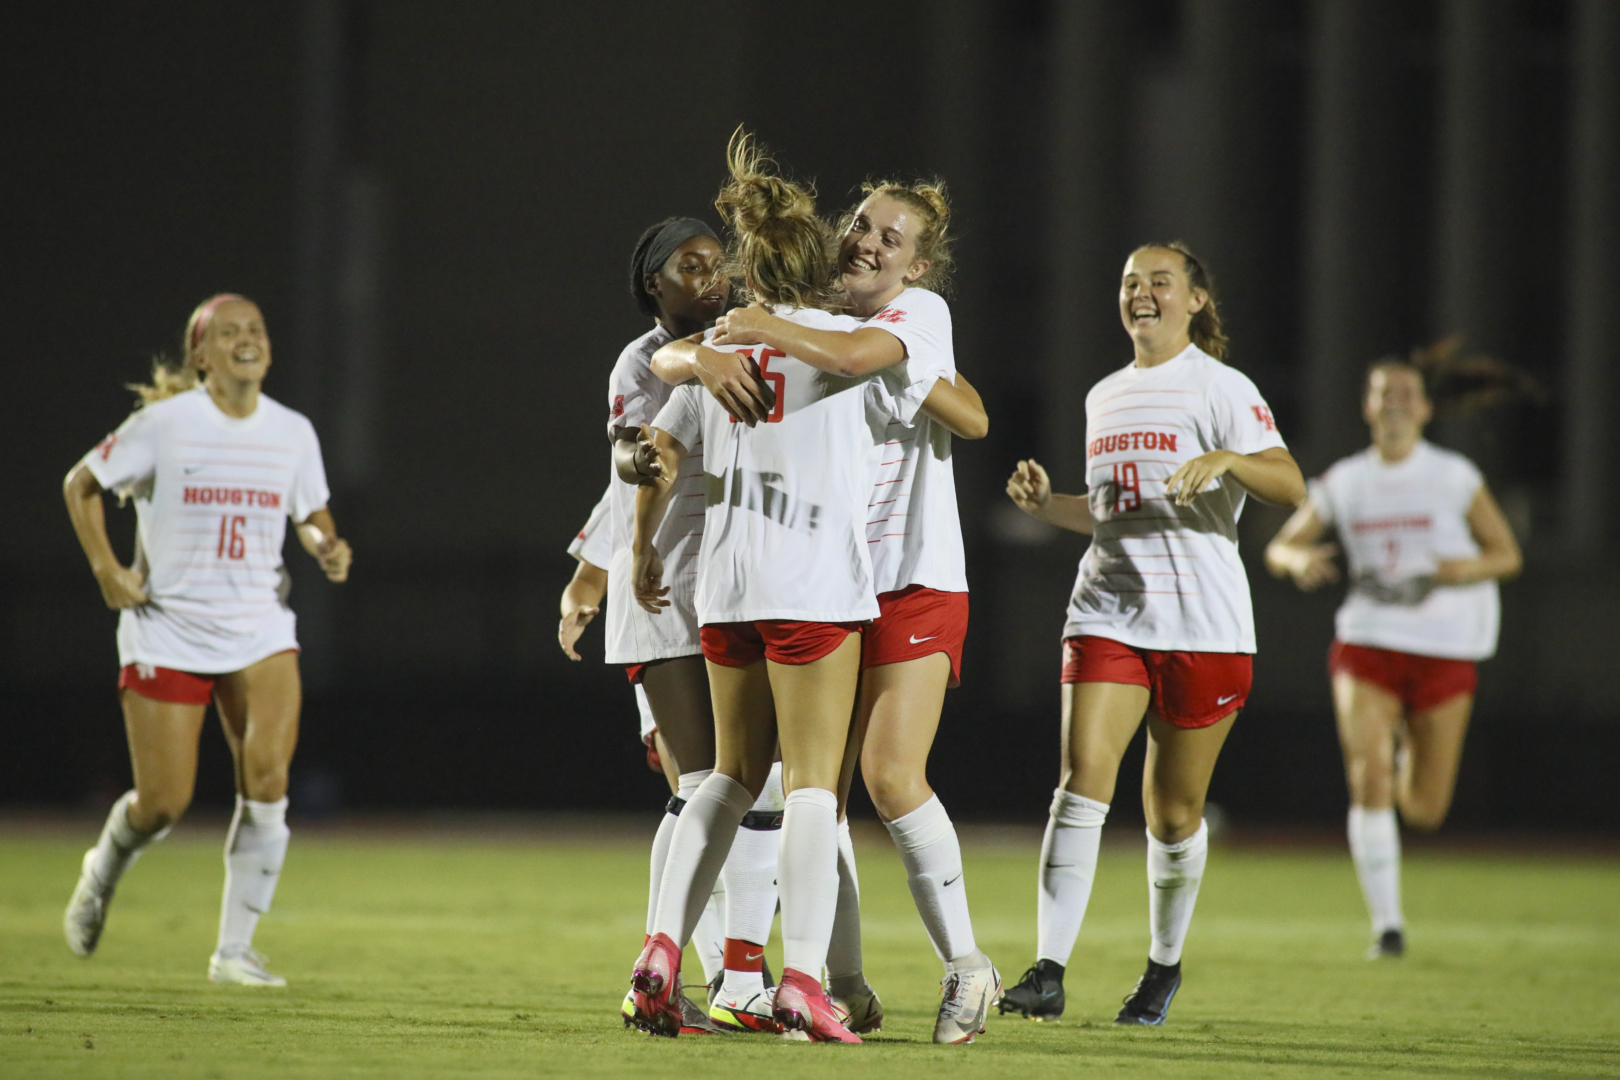 It was all smiles for UH soccer as the Cougars cruised past HBU Sunday night to remain undefeated in 2021. | Courtesy of UH athletics